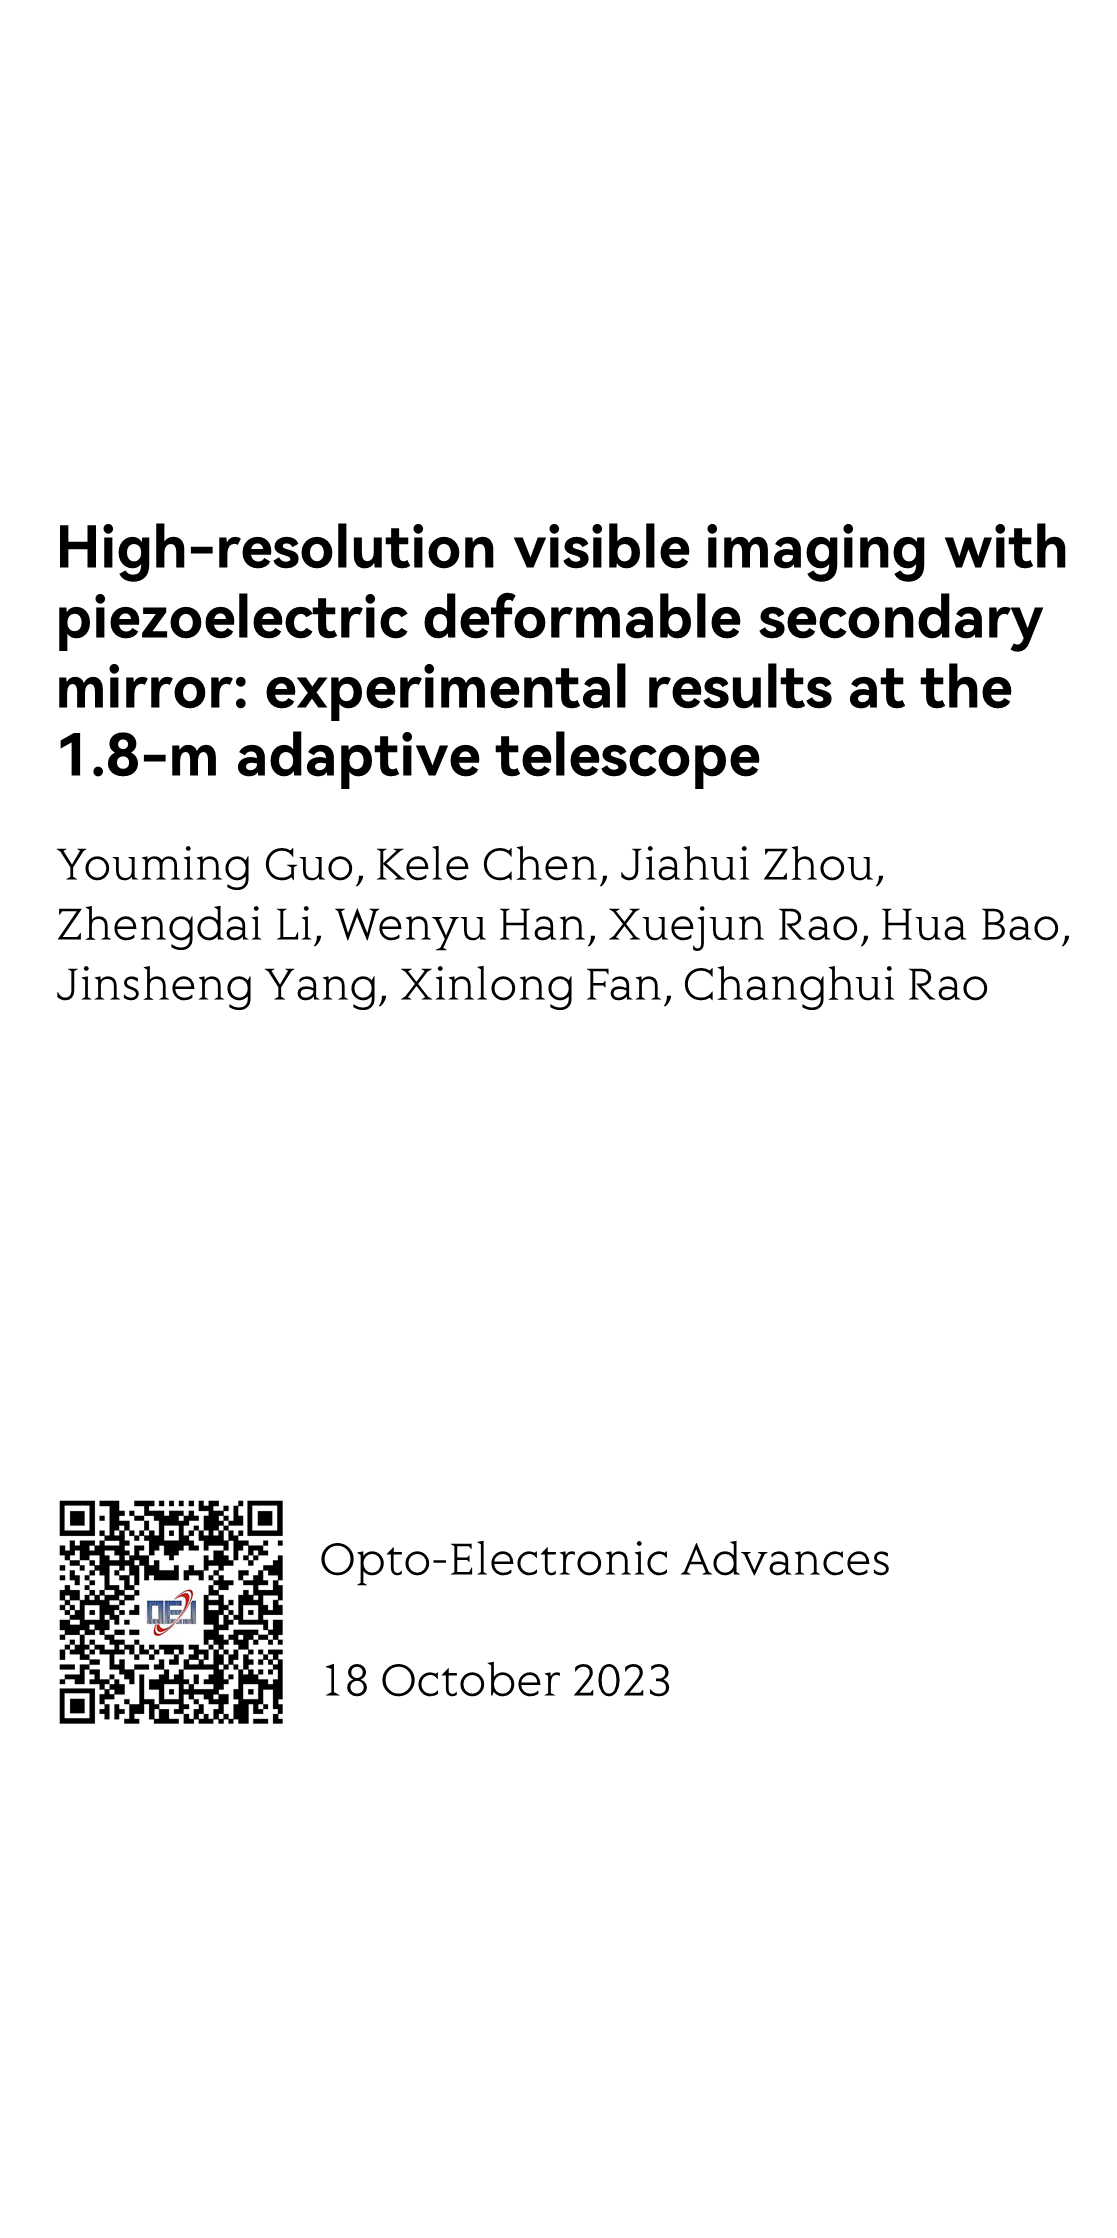 High-resolution visible imaging with piezoelectric deformable secondary mirror: experimental results at the 1.8-m adaptive telescope_1